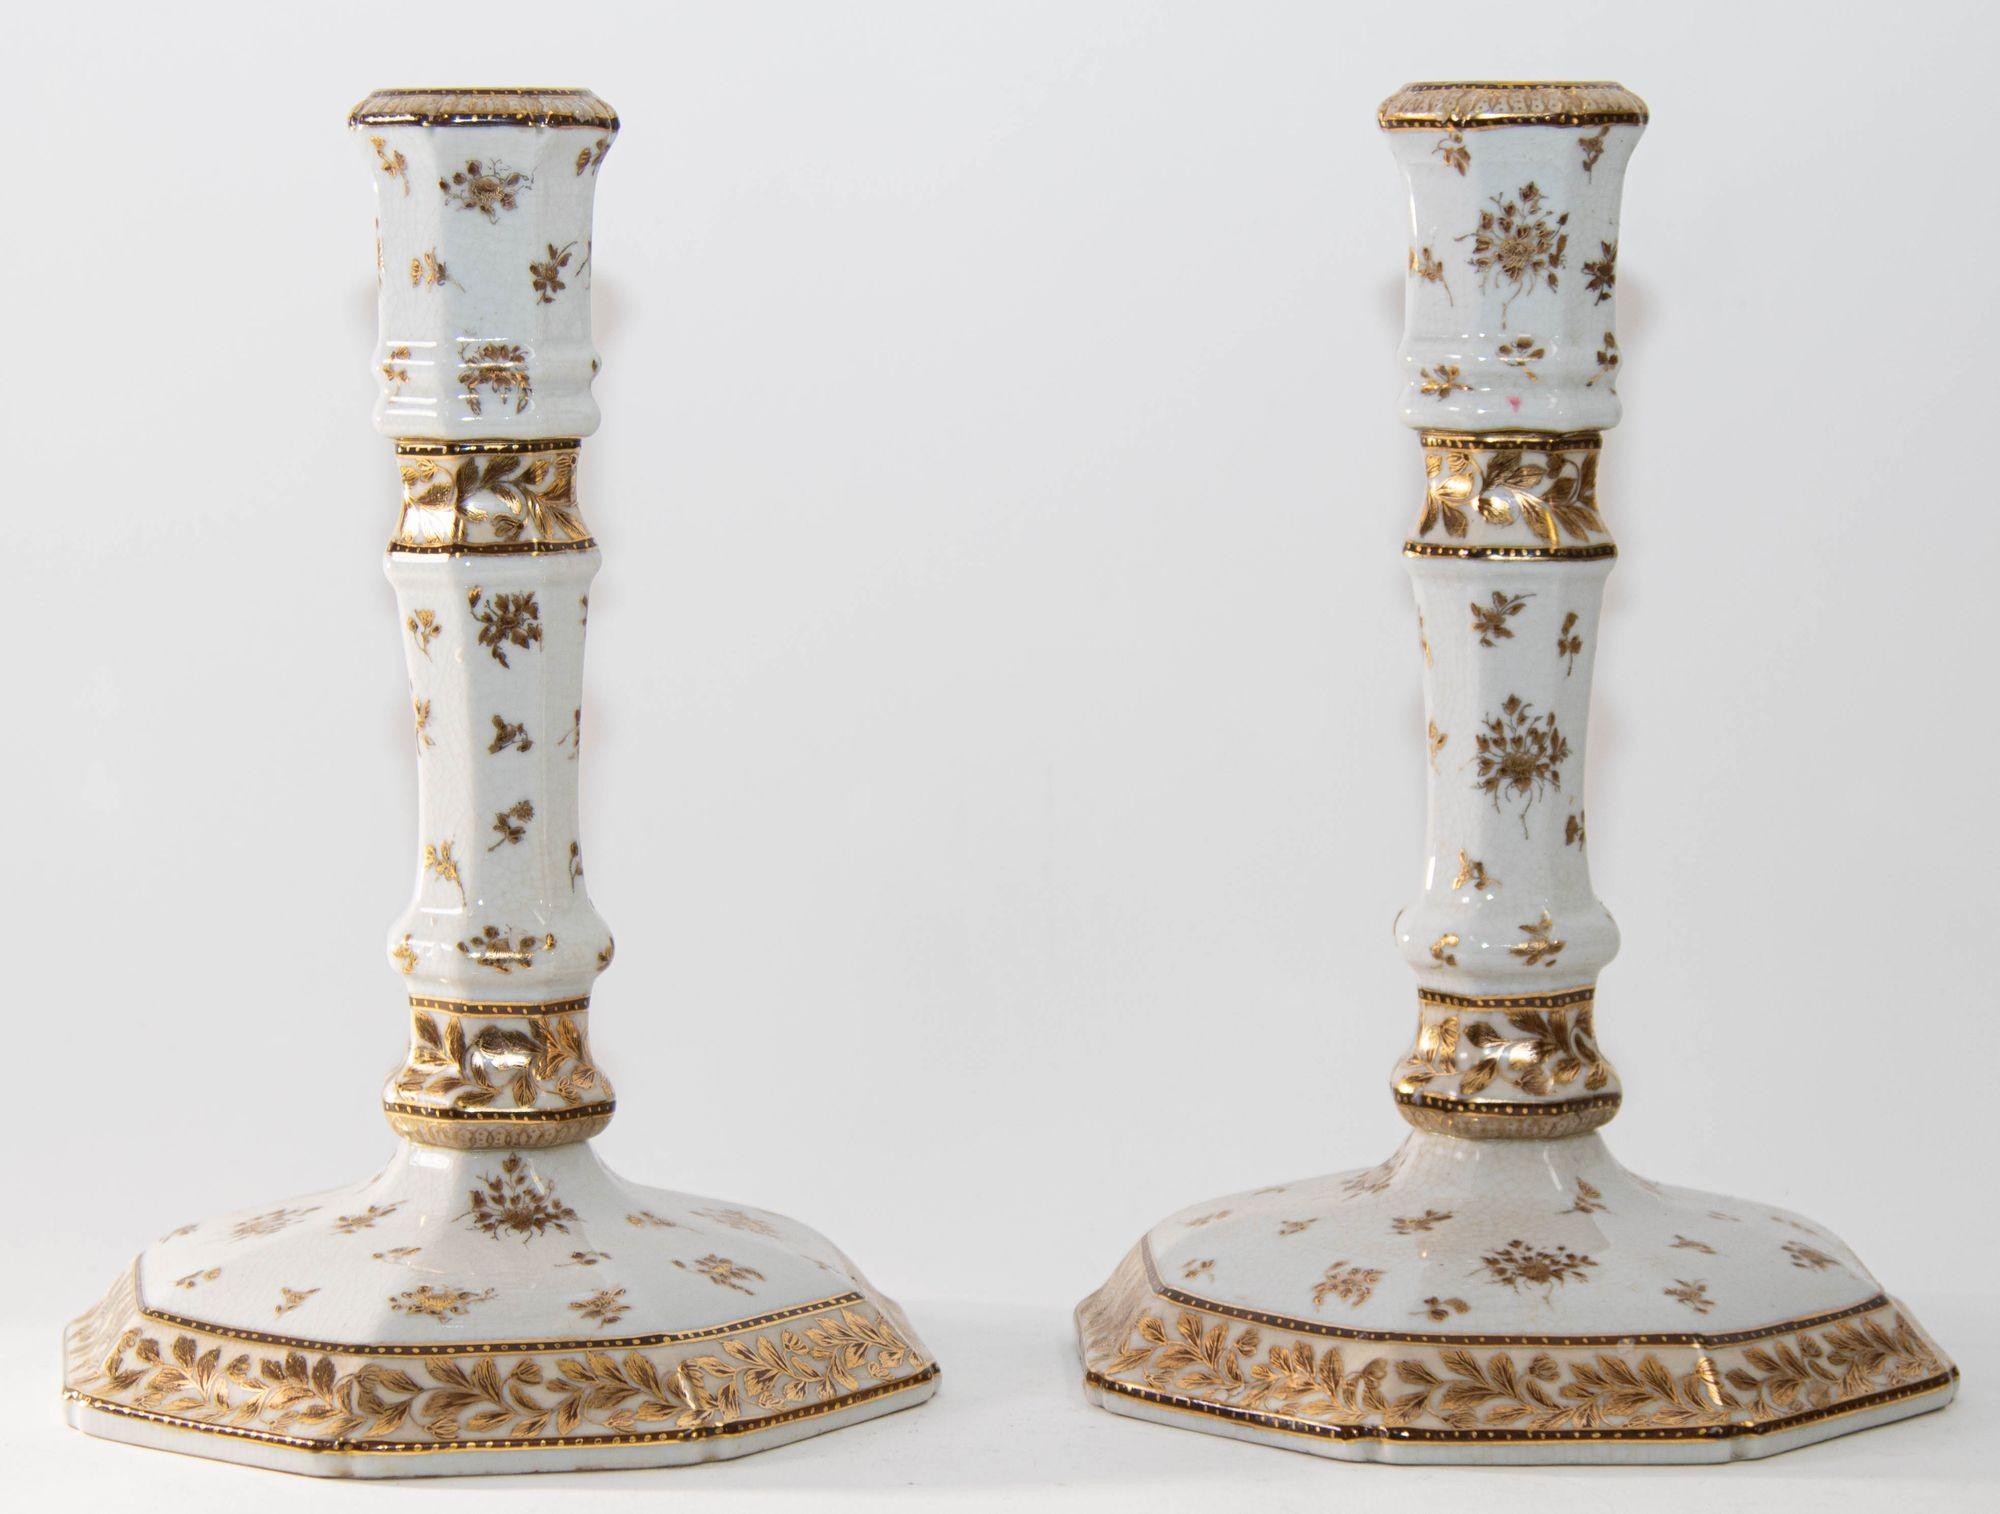 United Wilson Georgian Style Enameled Gilded Crazed Floral Leaf Candlesticks.
Of typical form hand painted with flowers and raised gilt ornament.
Modeled after a European French or Georgian style.
The candlesticks porcelain white ground are